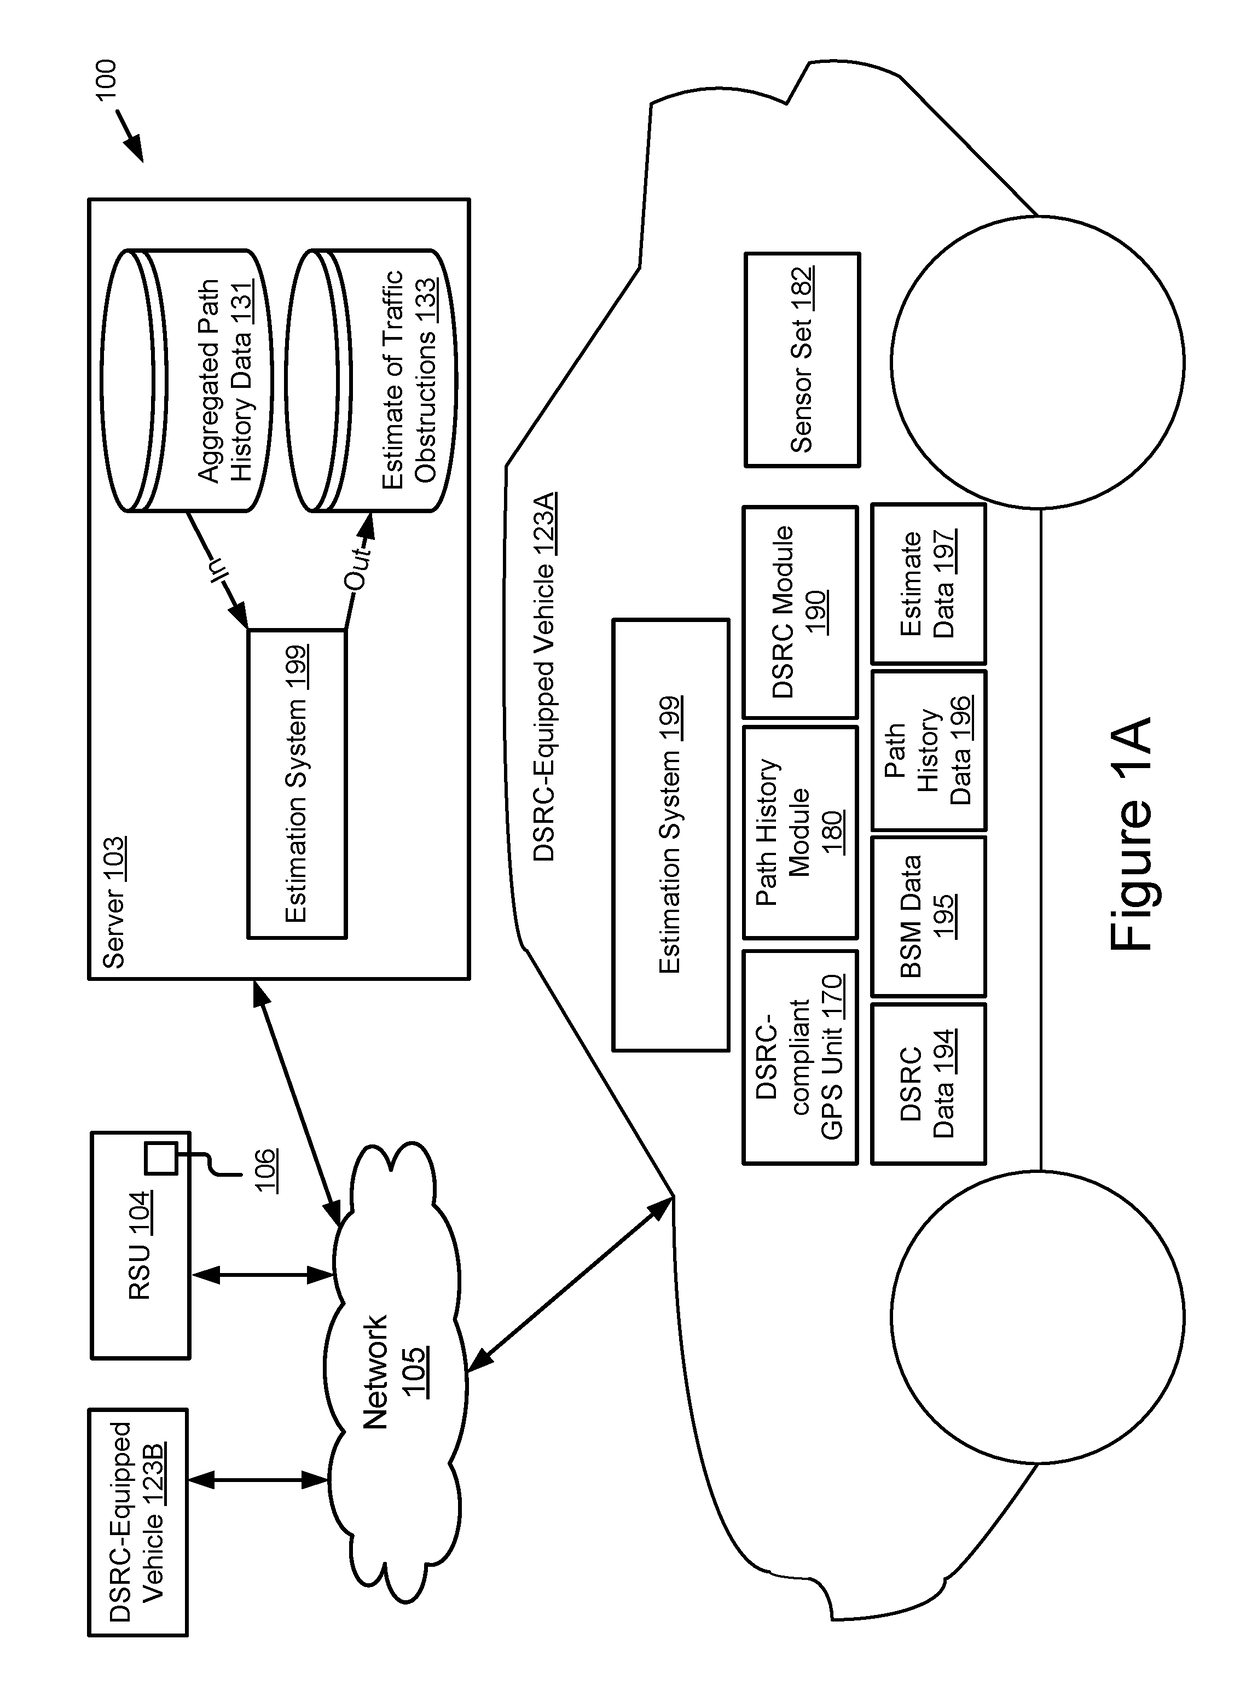 Traffic Obstruction Notification System Based on Wireless Vehicle Data